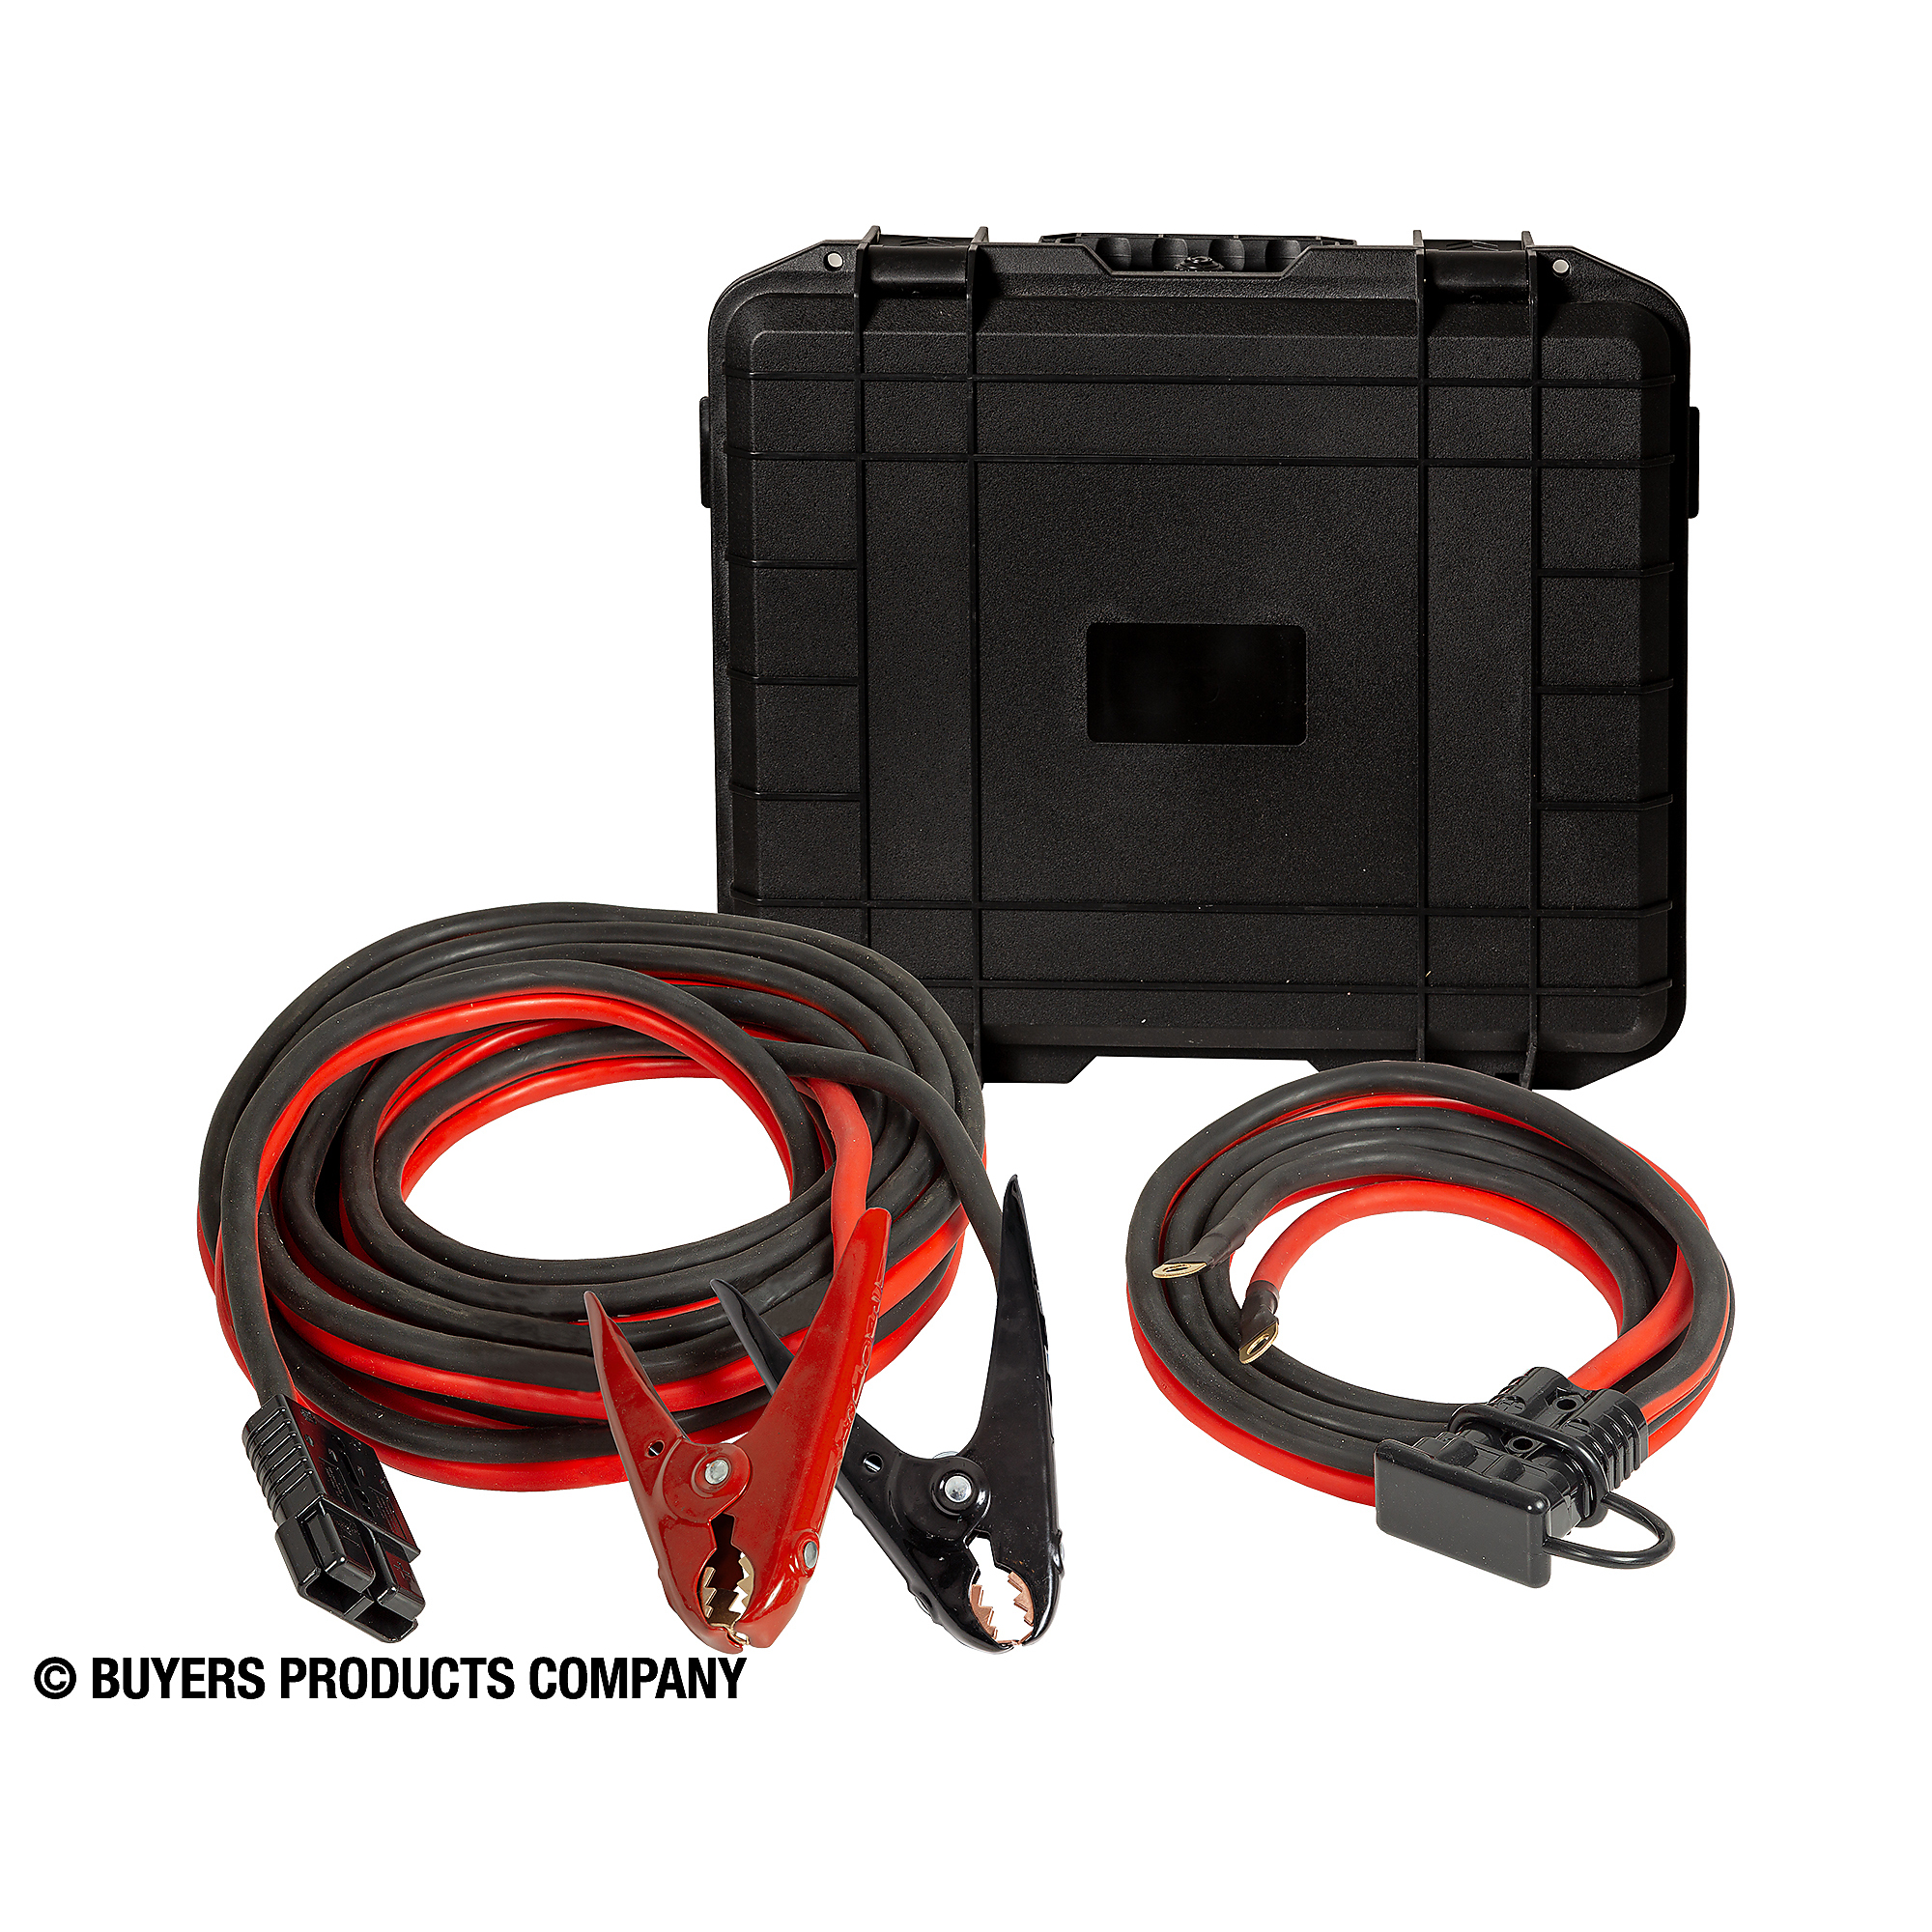 Buyers Products, 32.5ft. Long Booster Cables- 1000 Amp, Cable Gauge 2 Length 32.5 ft, Amps 1000 Model 5601033